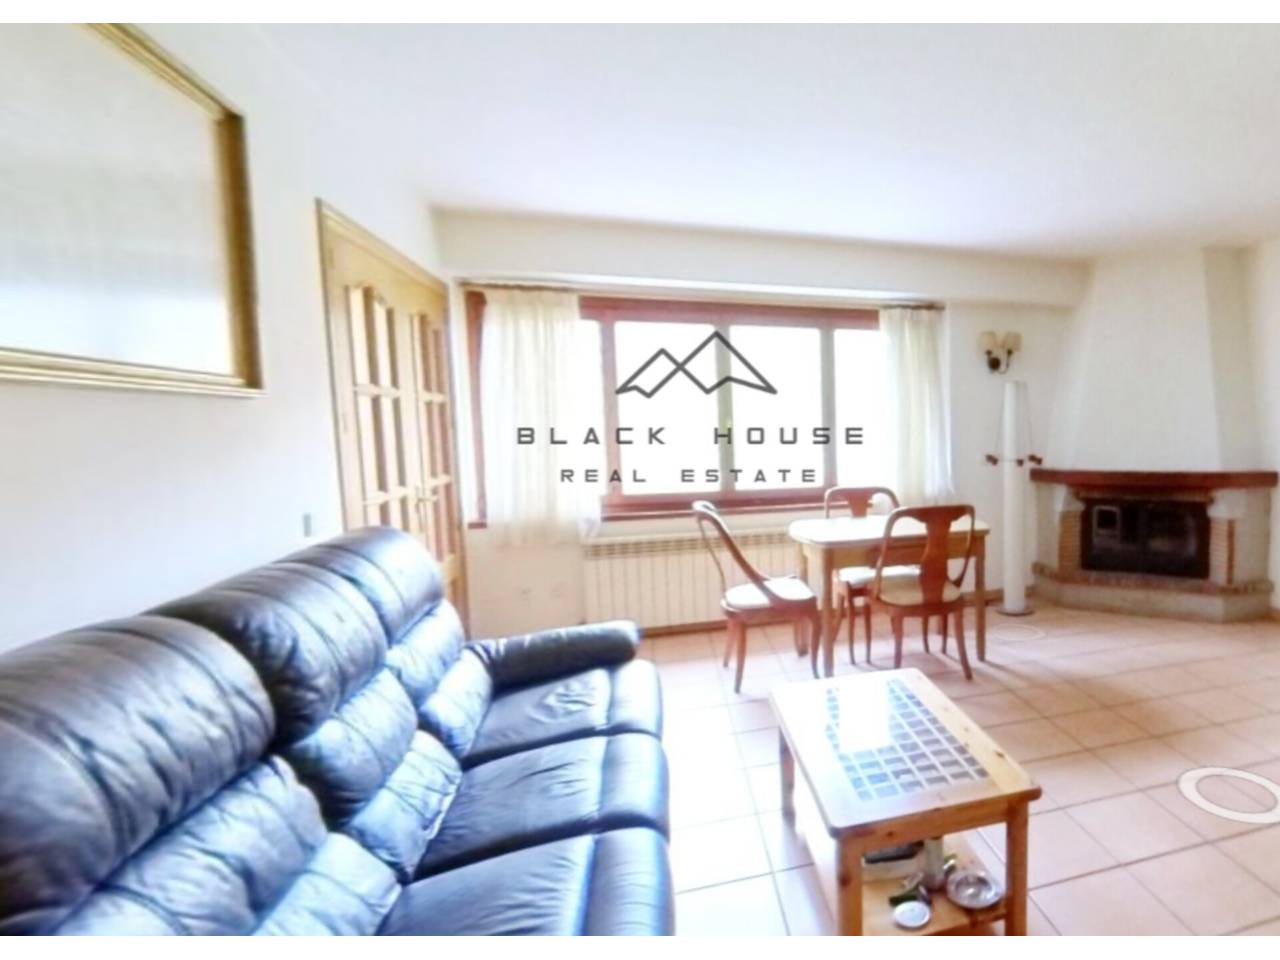  Terraced house for sale in a residential area of ??Andorra la Vella.